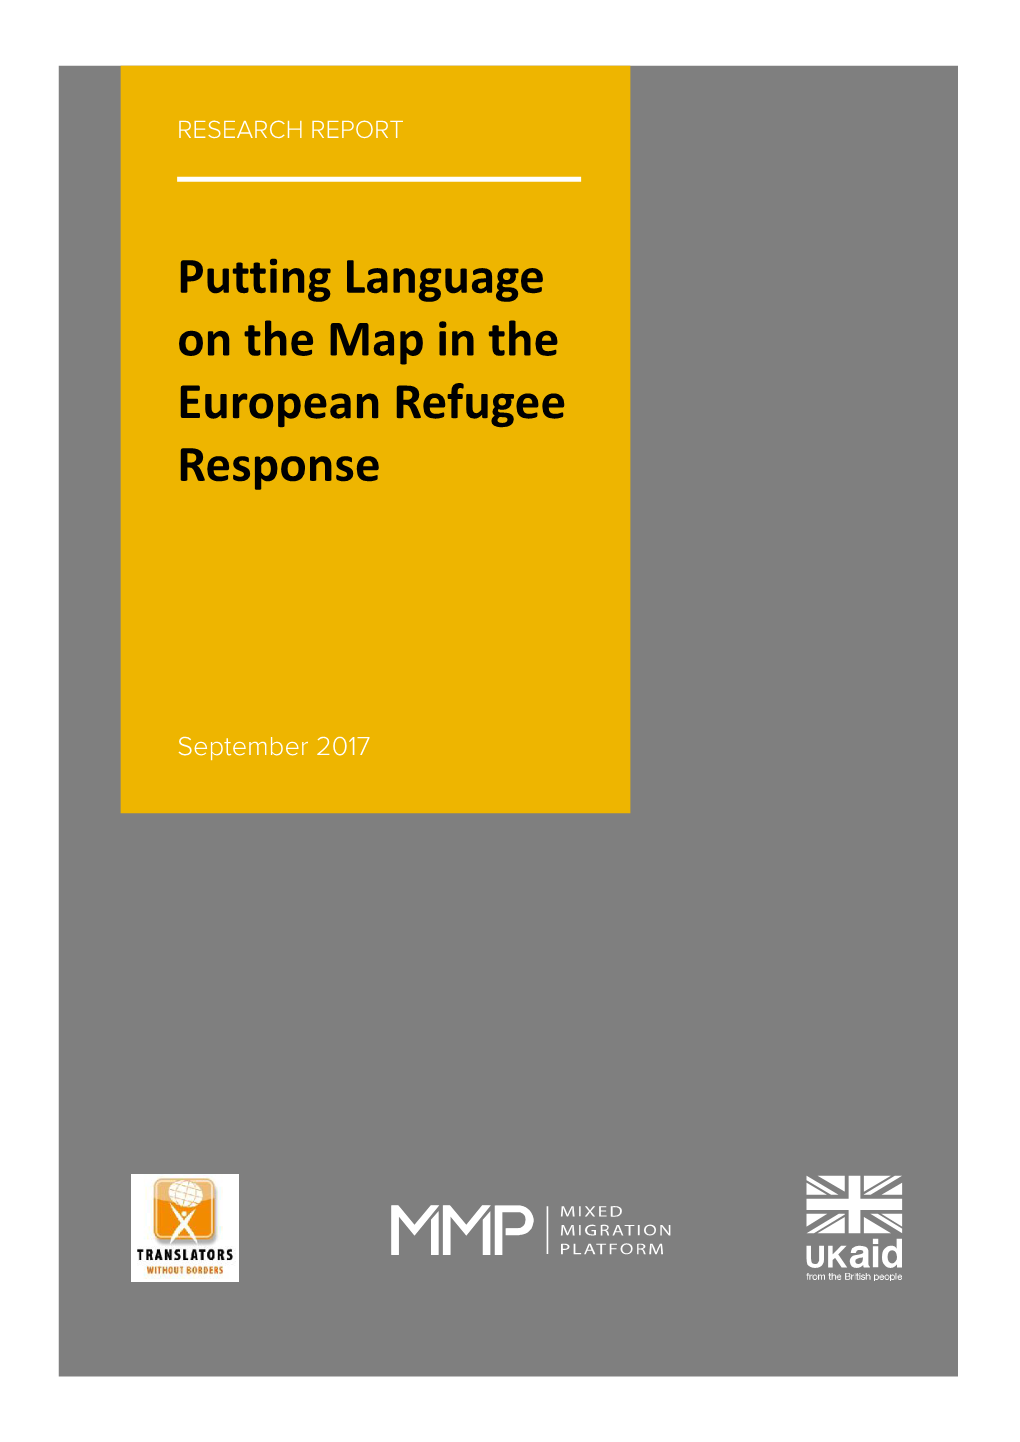 Putting Language on the Map in the European Refugee Response